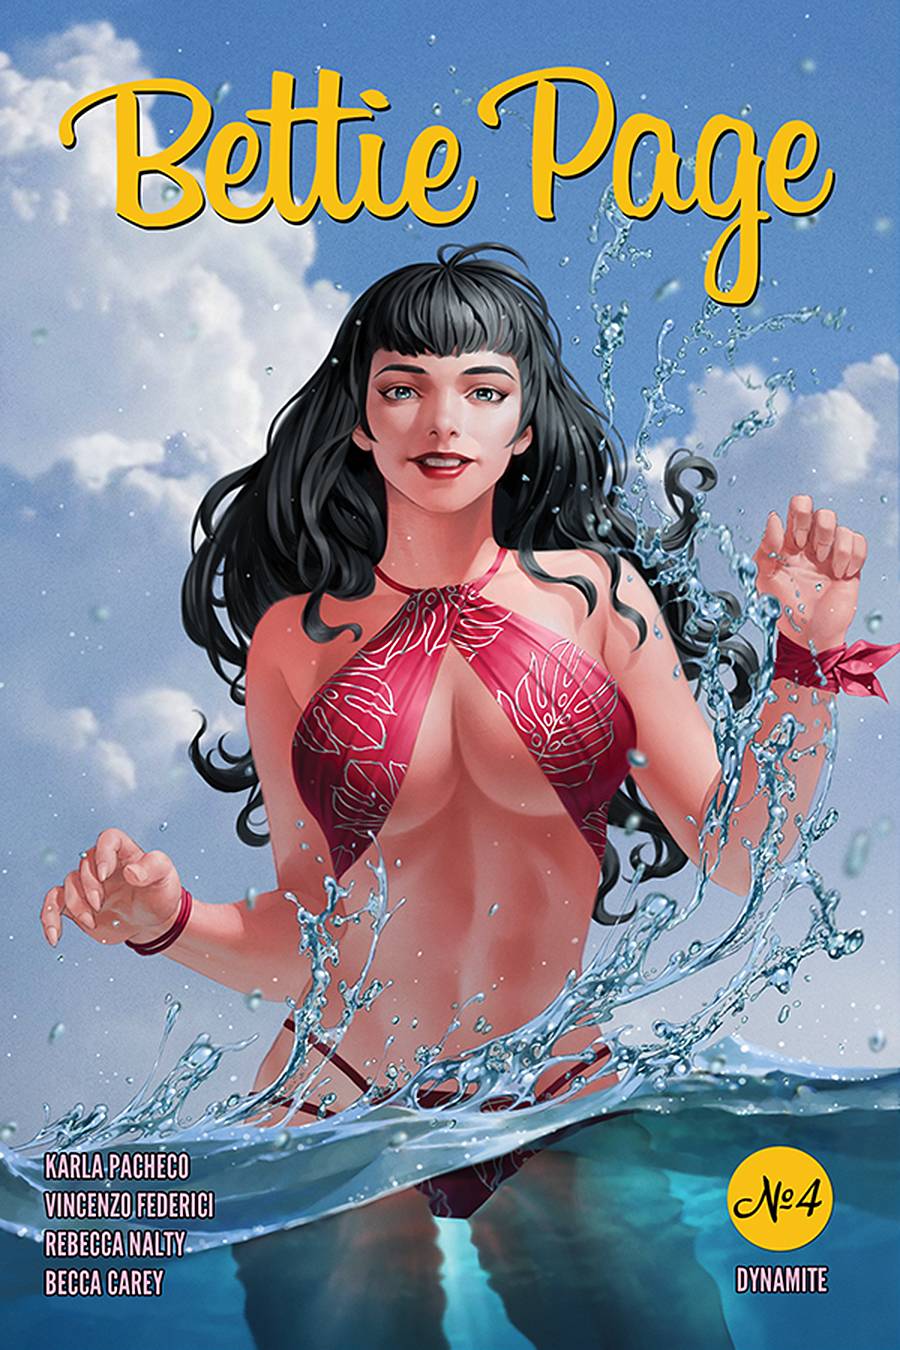 Bettie Page #4 (2020)